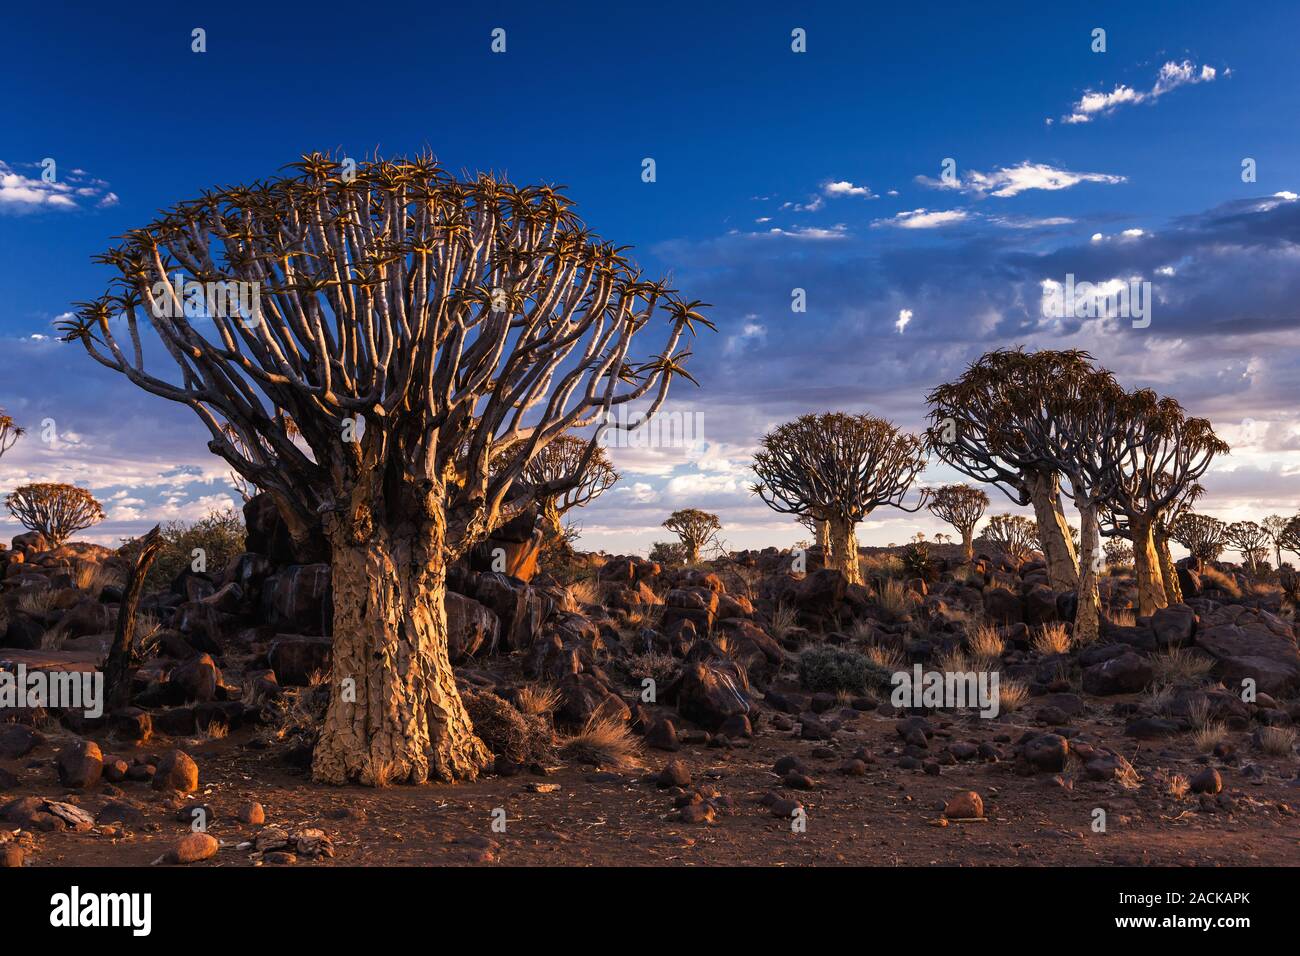 Quiver Tree Forest, Aloe dichotoma, early morning, in Keetmanshoop, Namibia, Africa Stock Photo